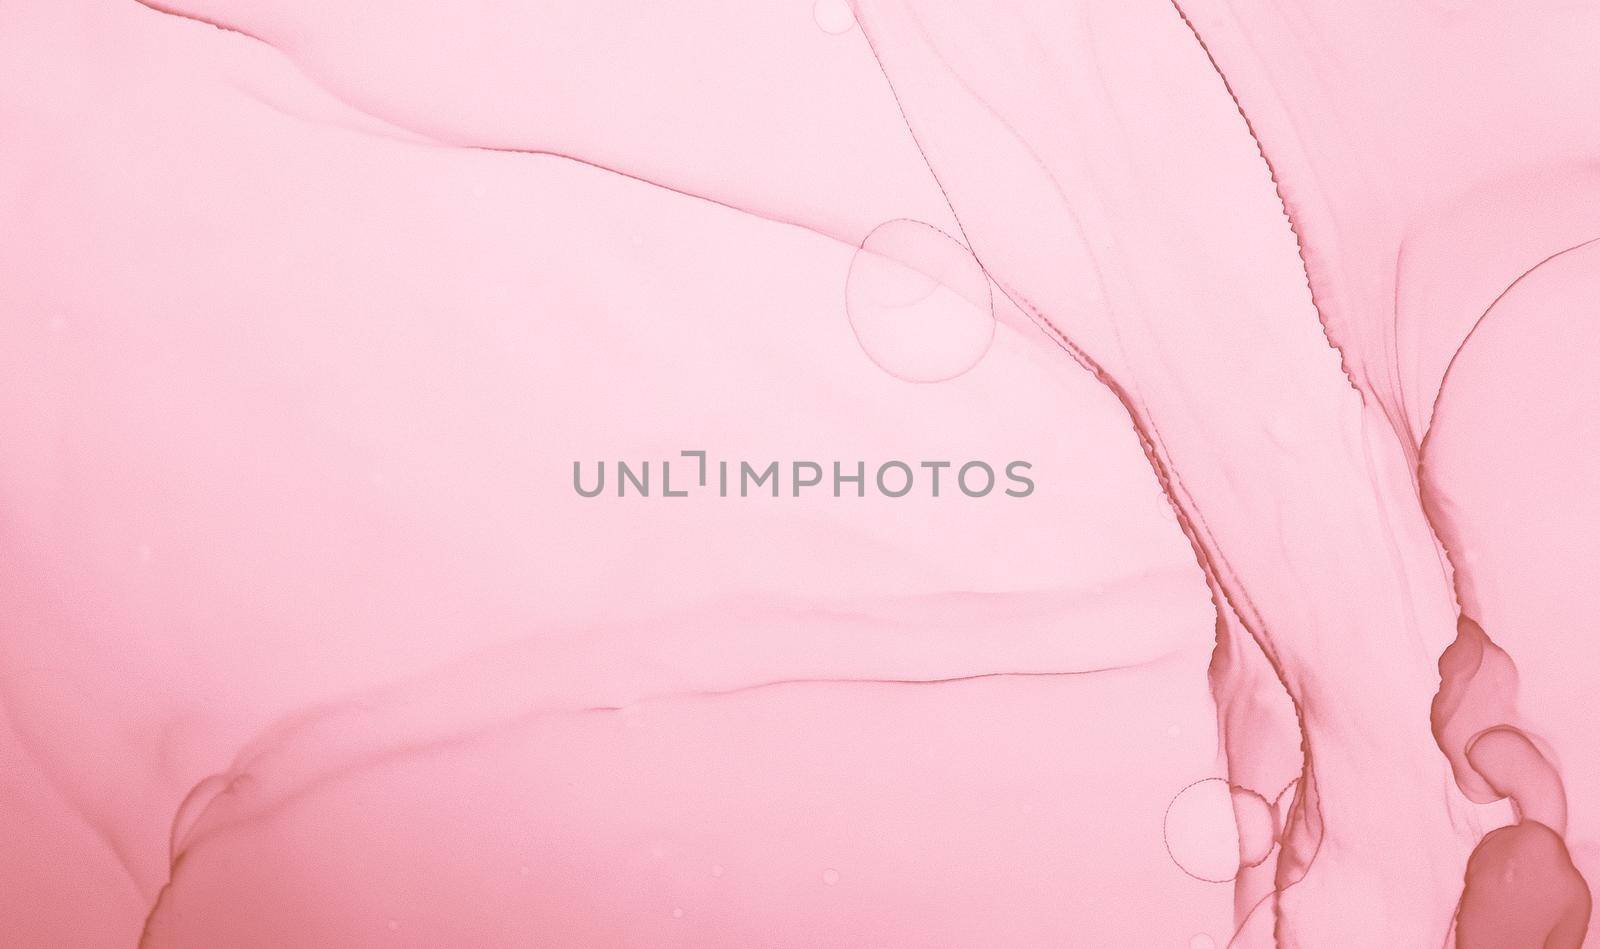 Delicate Pink Marble. Abstract Background. Art Color Effect. Acrylic Drops. Spring Fluid Painting. Alcohol Luxury Marble. Elegant Wallpaper. Ink Creative Print. Sophisticated Liquid Marble.